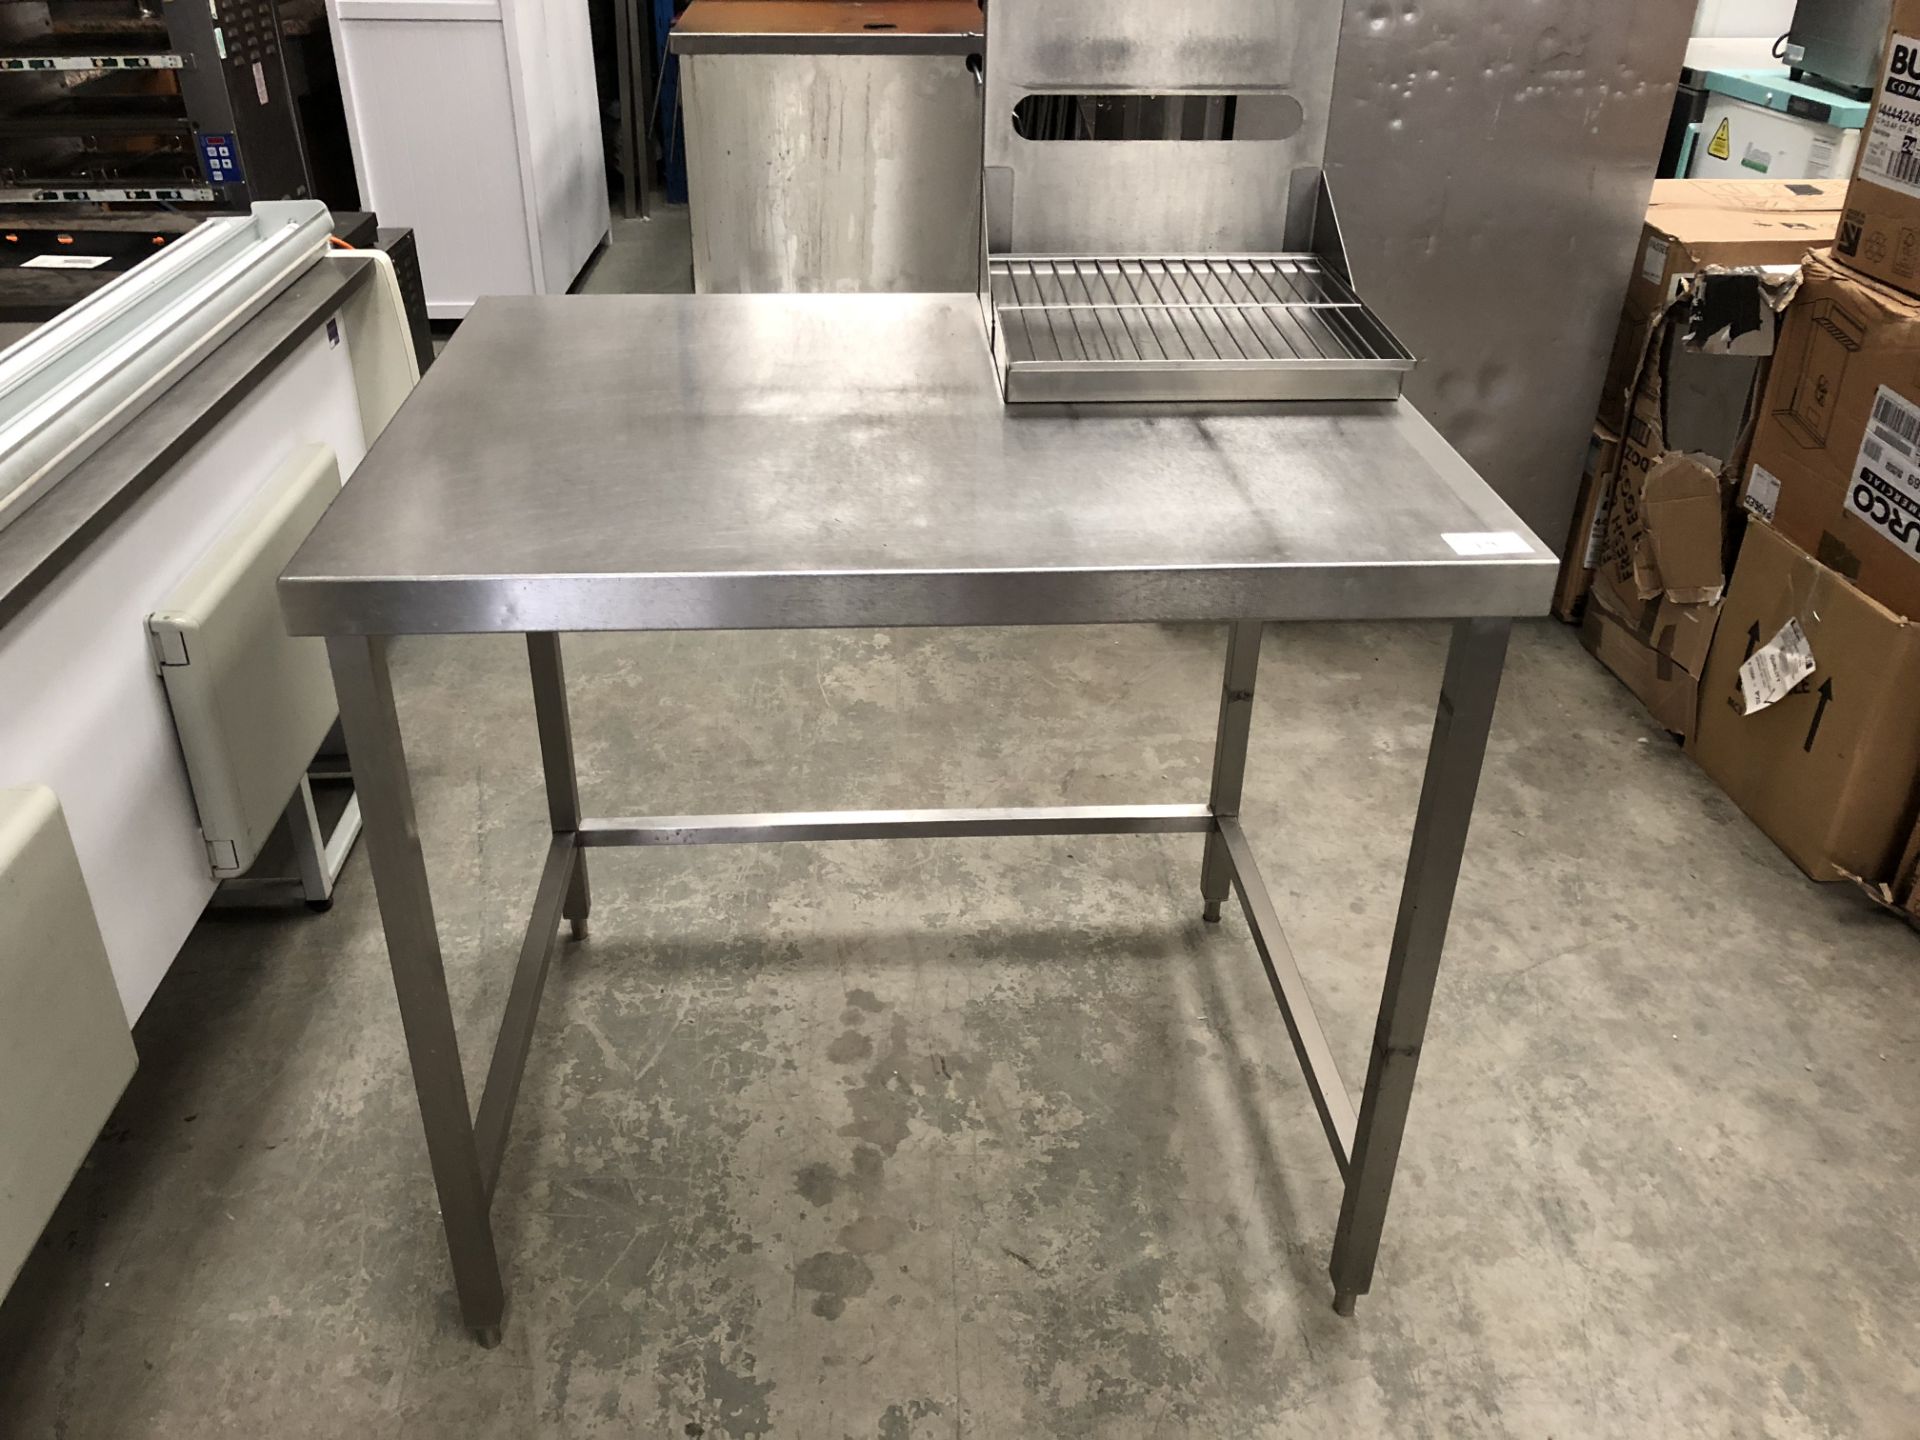 Stainless Steel Table with Chip Fryer Basket Holder